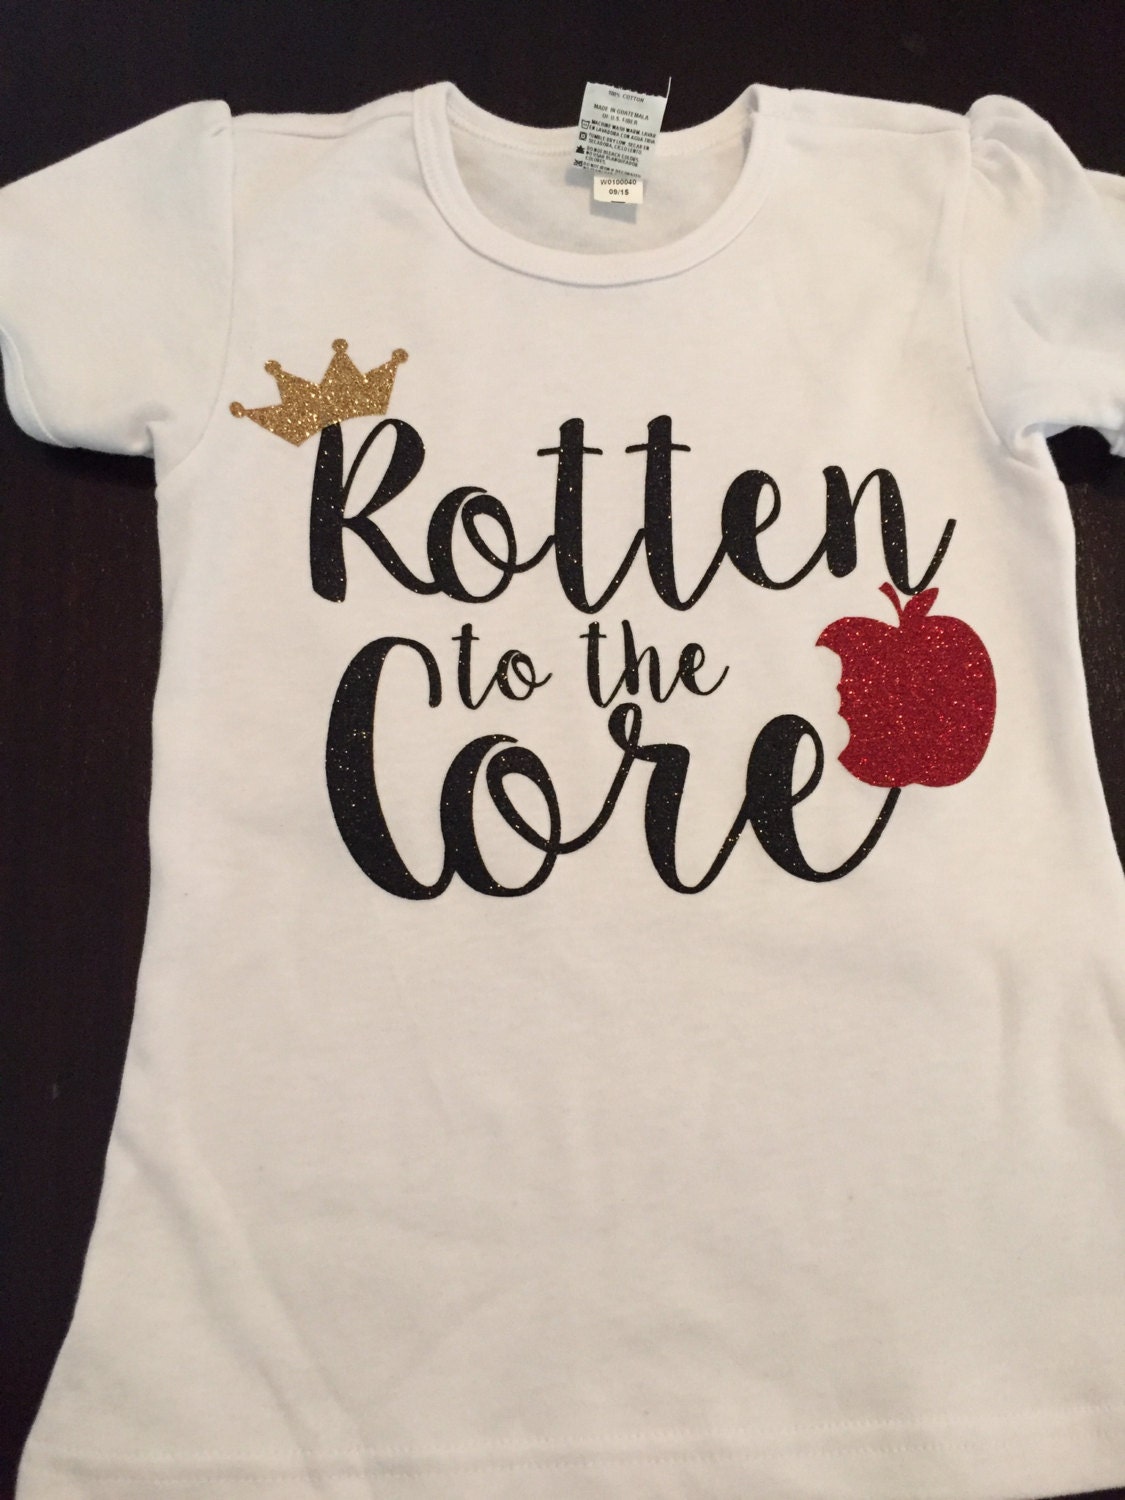 Download Disney descendants inspired rotten to the core shirt